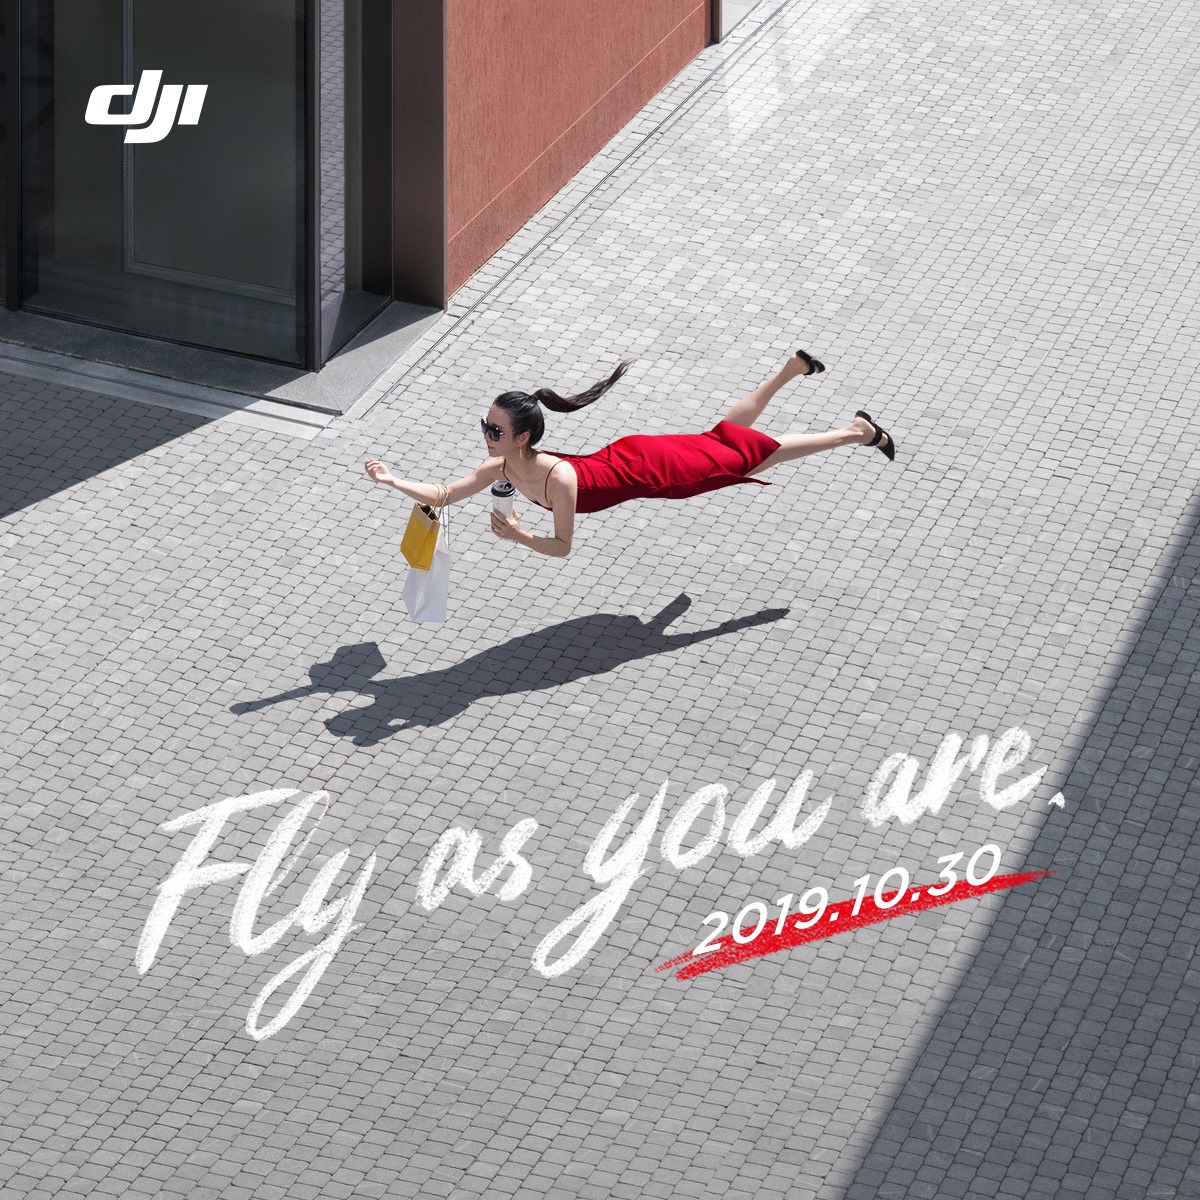 DJI NEW PRODUCT ALERT - FLY AS YOUR ARE - What could the new product be? 